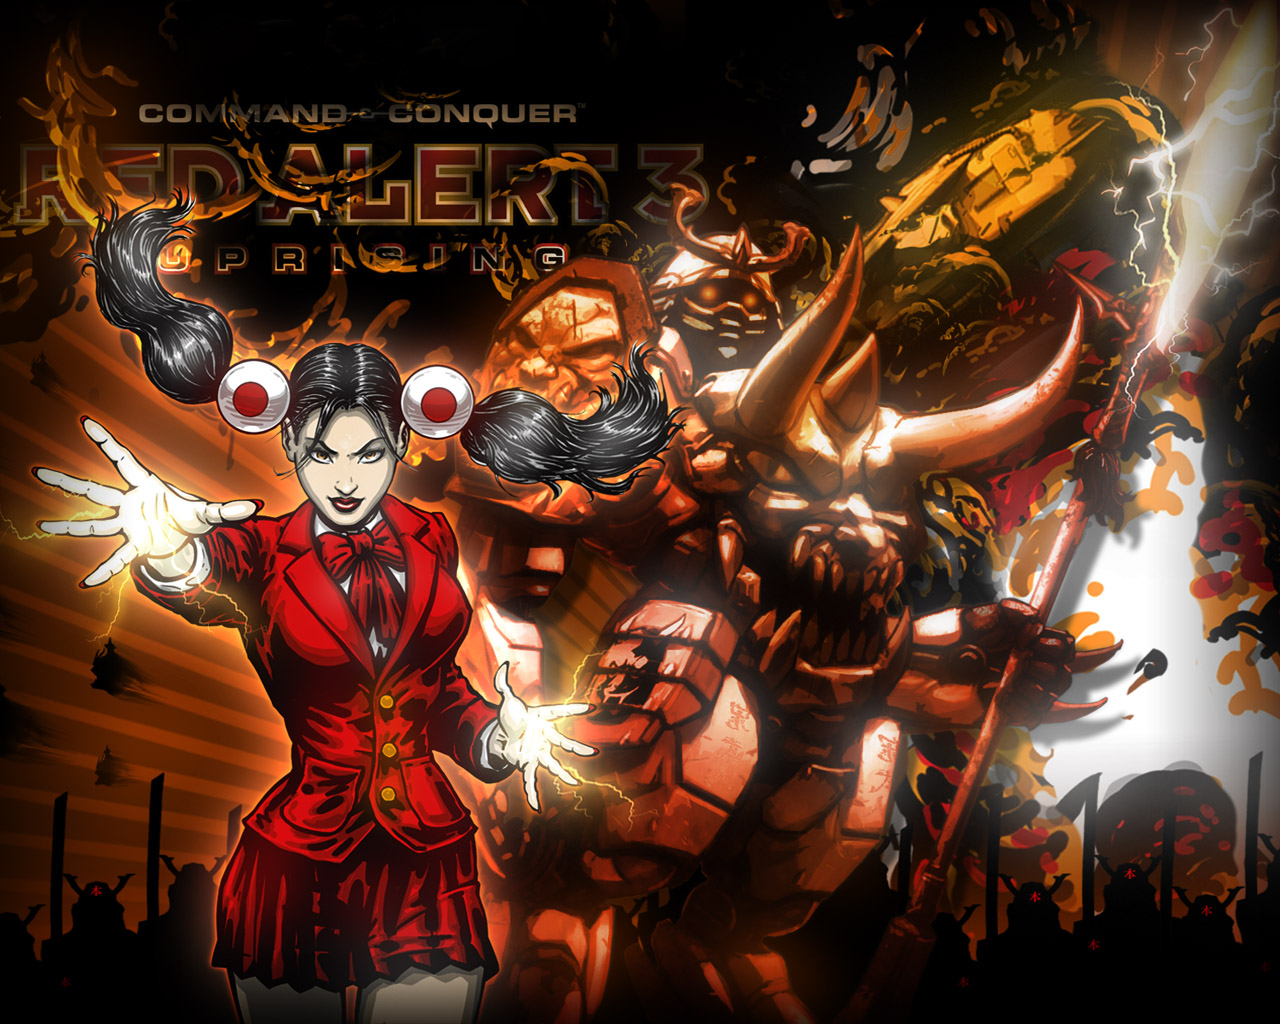 Mand And Conquer Red Alert Uprising Wallpaper